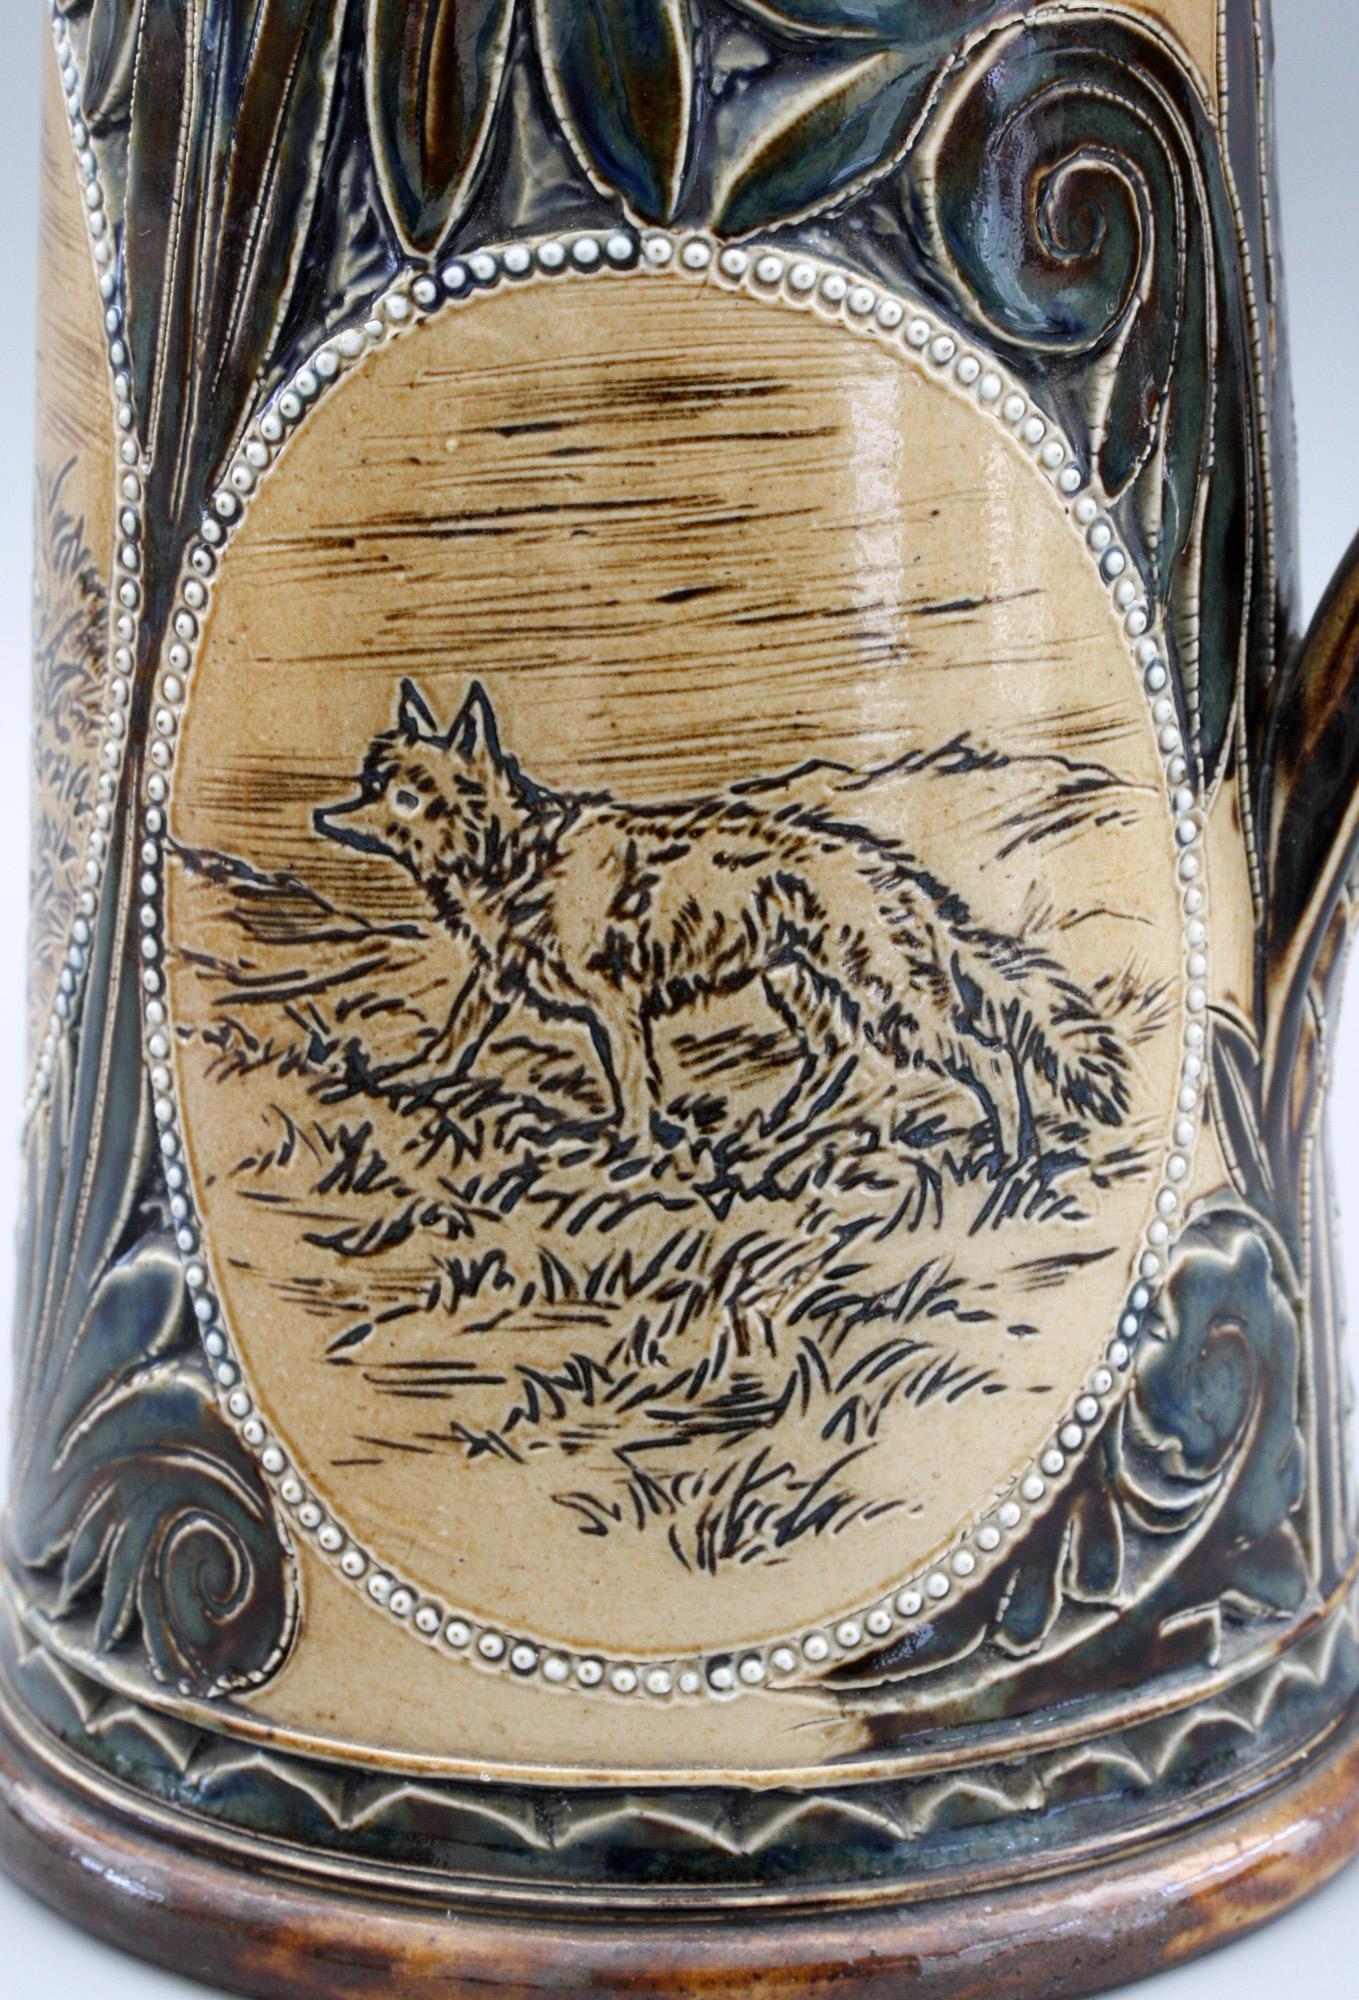 Stoneware Florence Barlow for Doulton Lambeth Rare Jug with Wolves Dated 1876